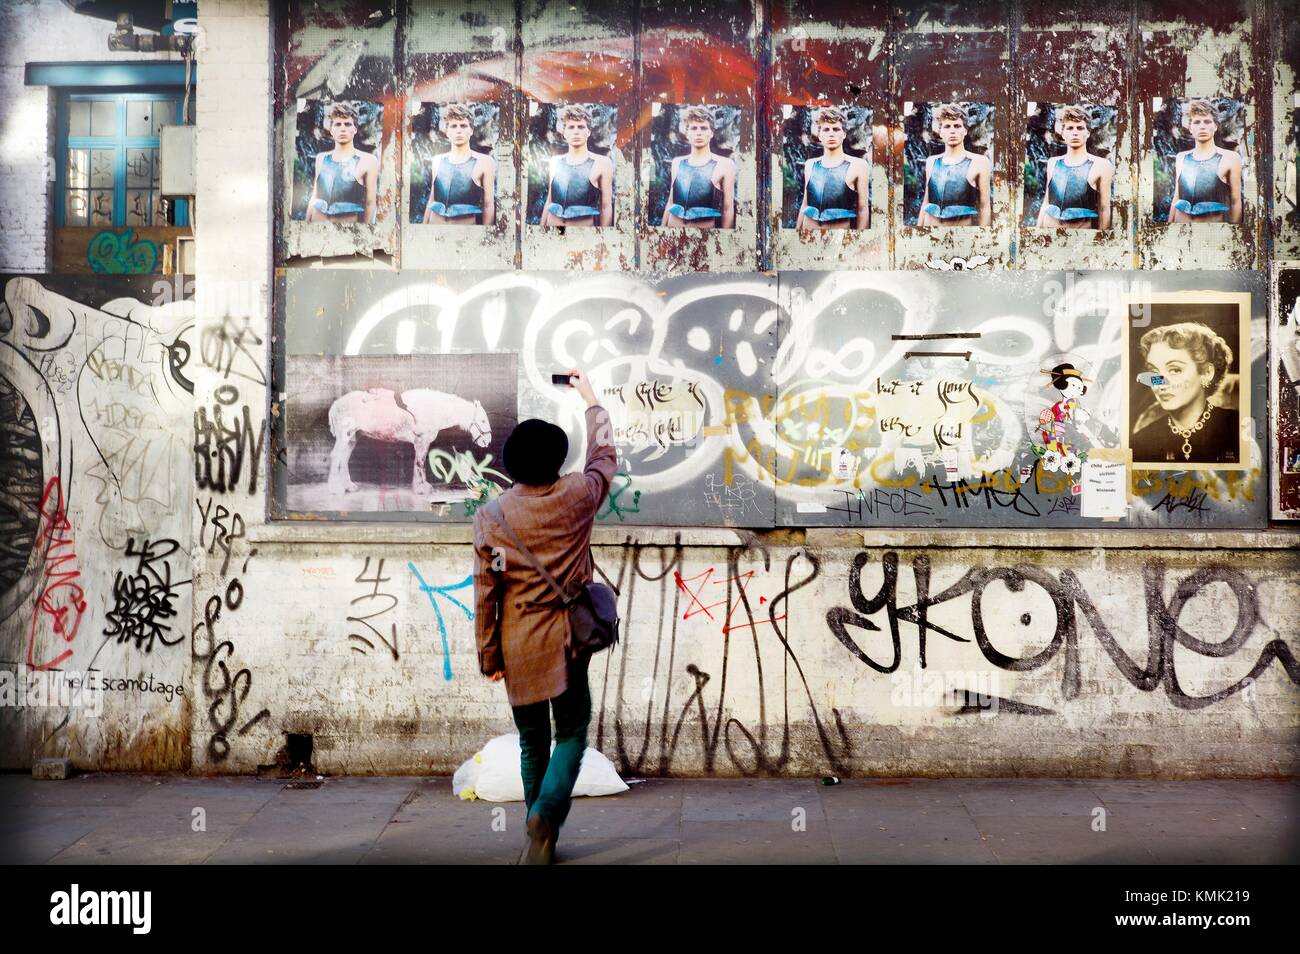 Man taking picture of a graffiti on wall. East London, London, England Stock Photo